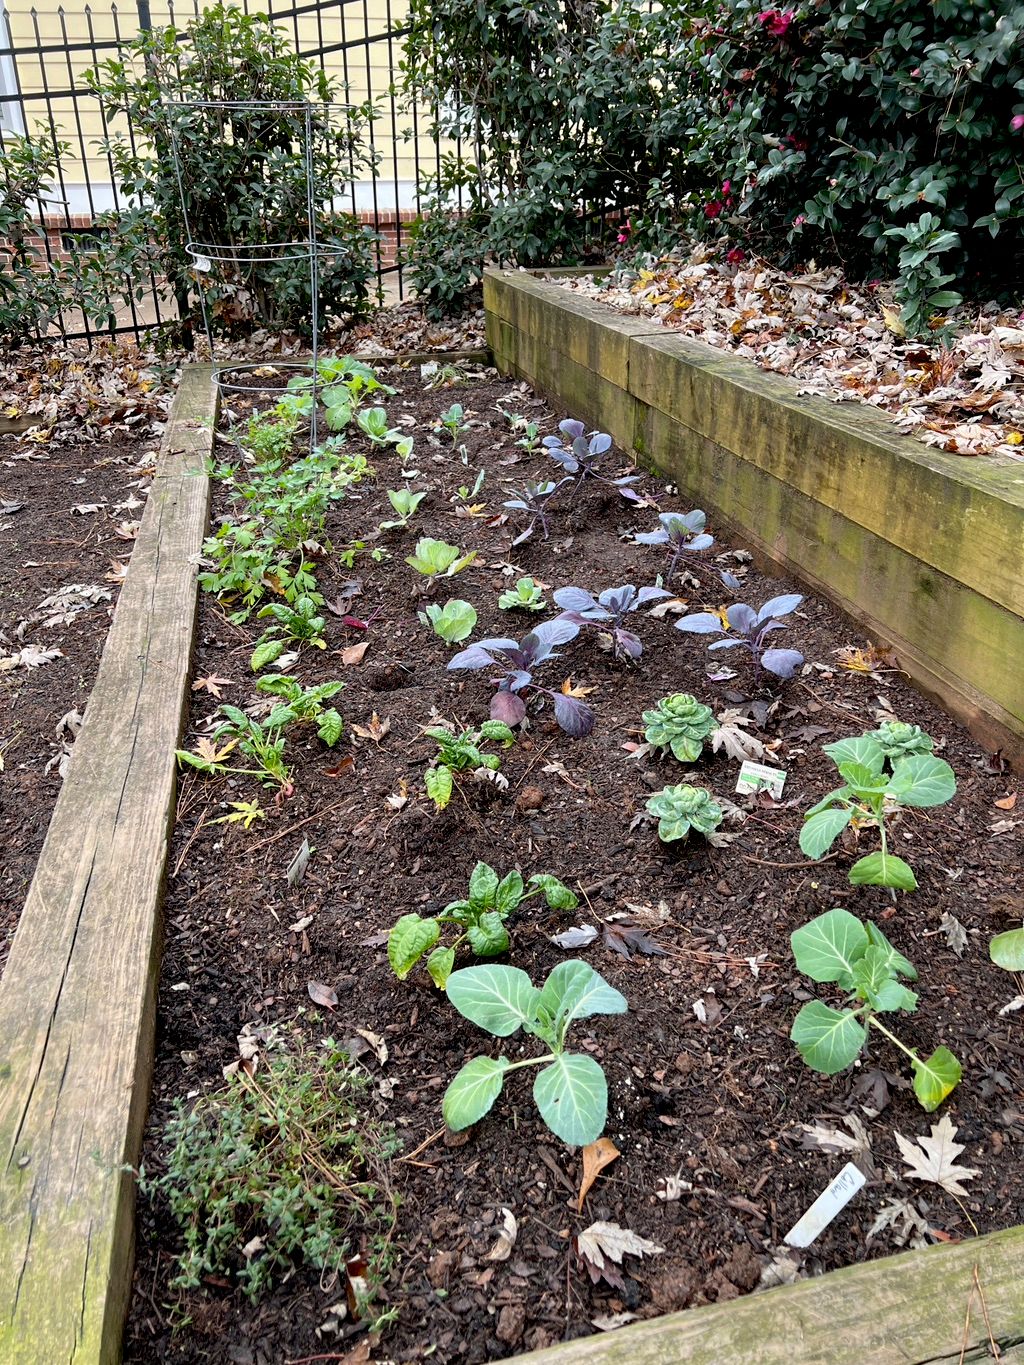 How Much Space Do You Need For a Vegetable Garden? - FineGardening